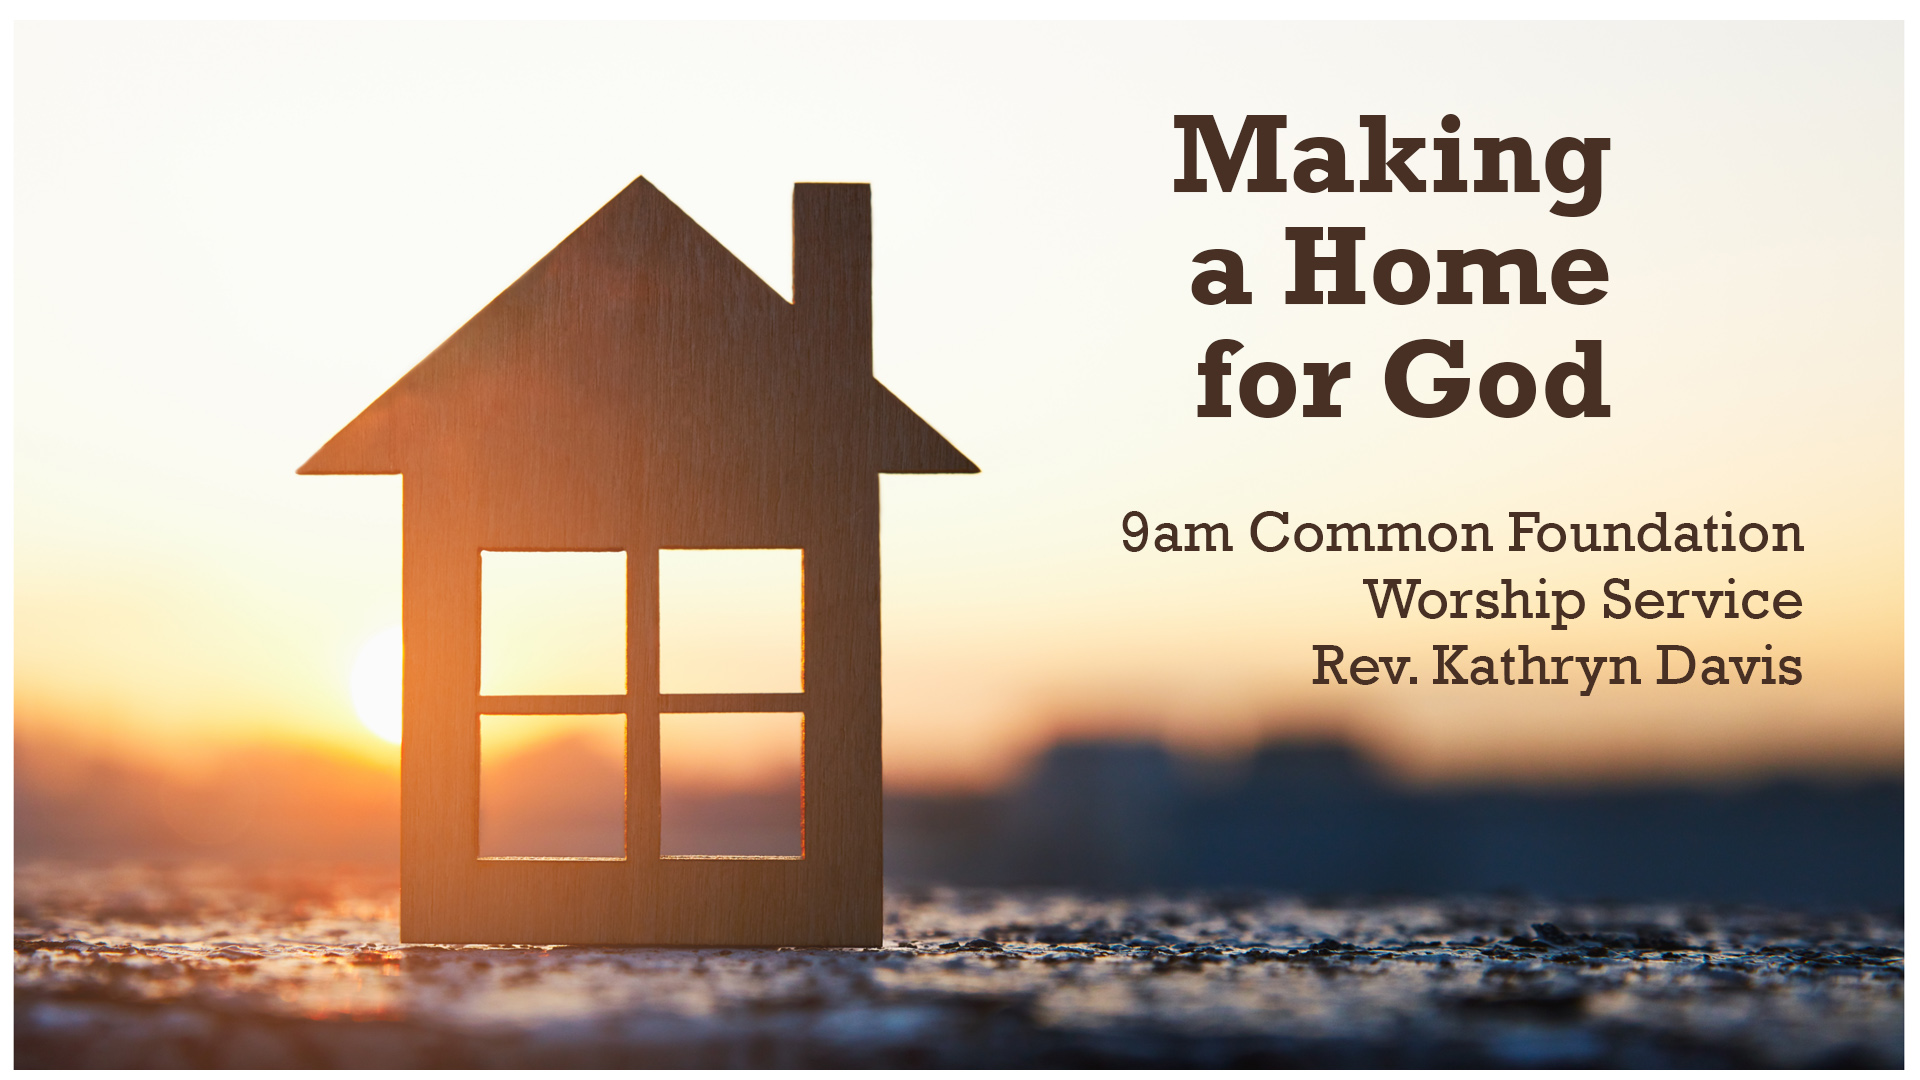 Making a Home for God (Common Foundation)